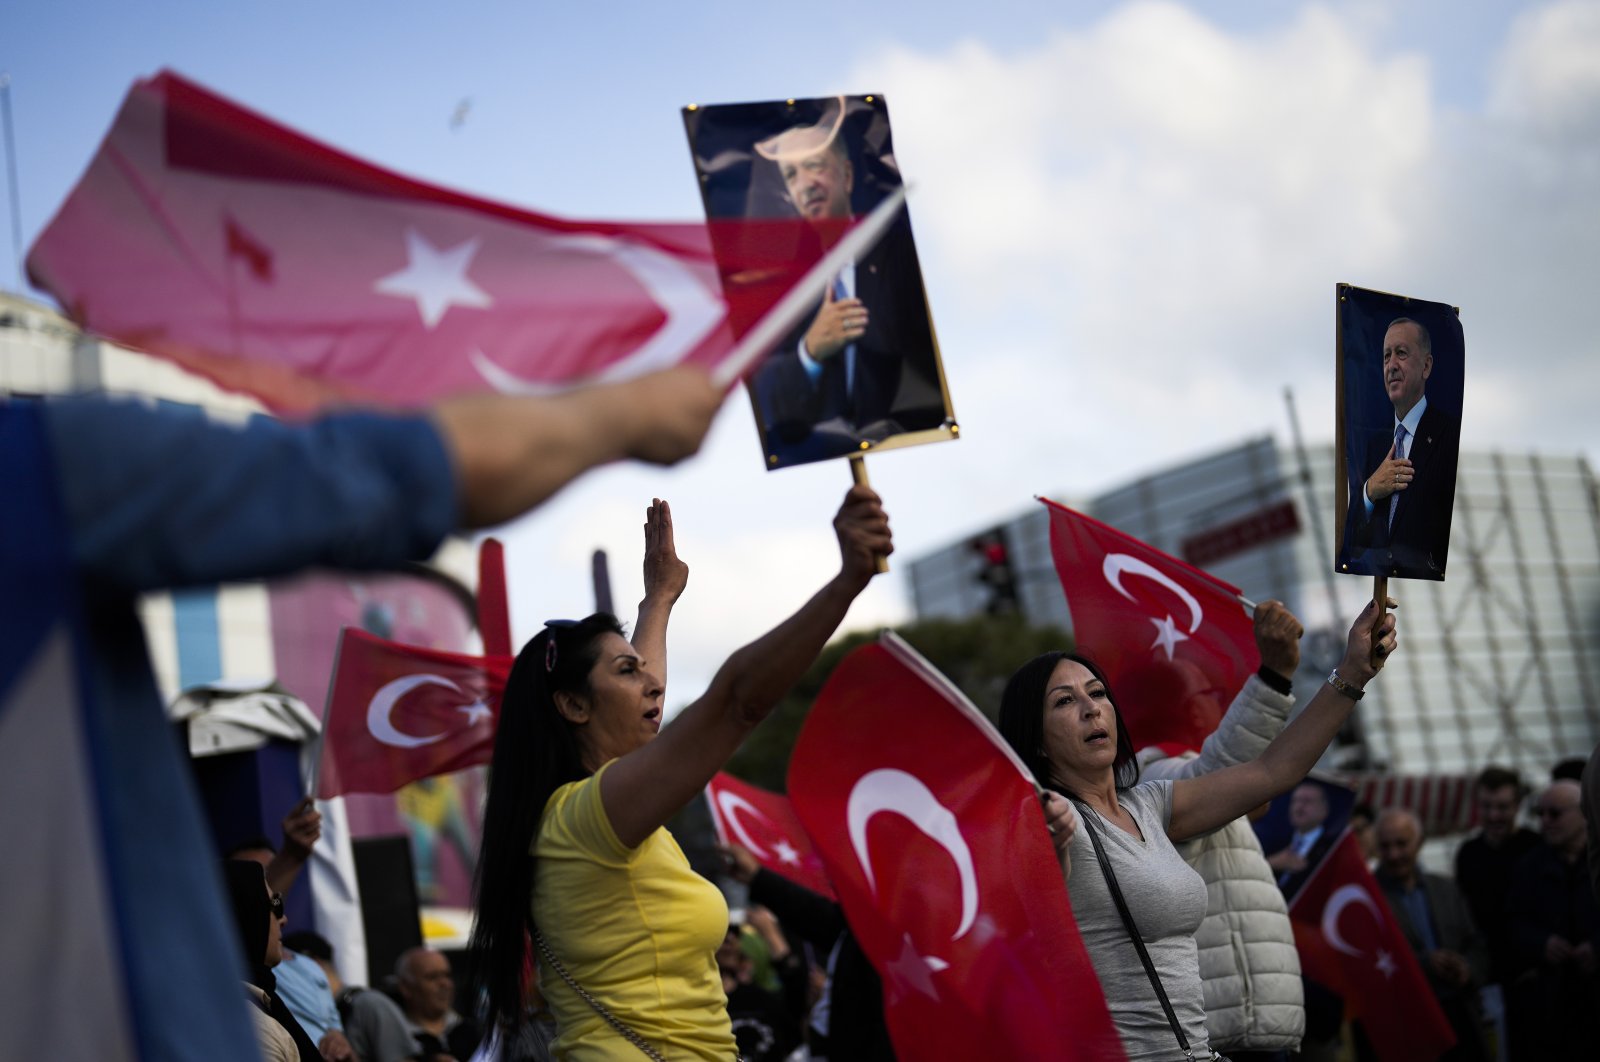 Supporters of President Recep Tayyip Erdoğan dance as they give handouts to commuters in Istanbul, Türkiye, May 23, 2023. (AP Photo)